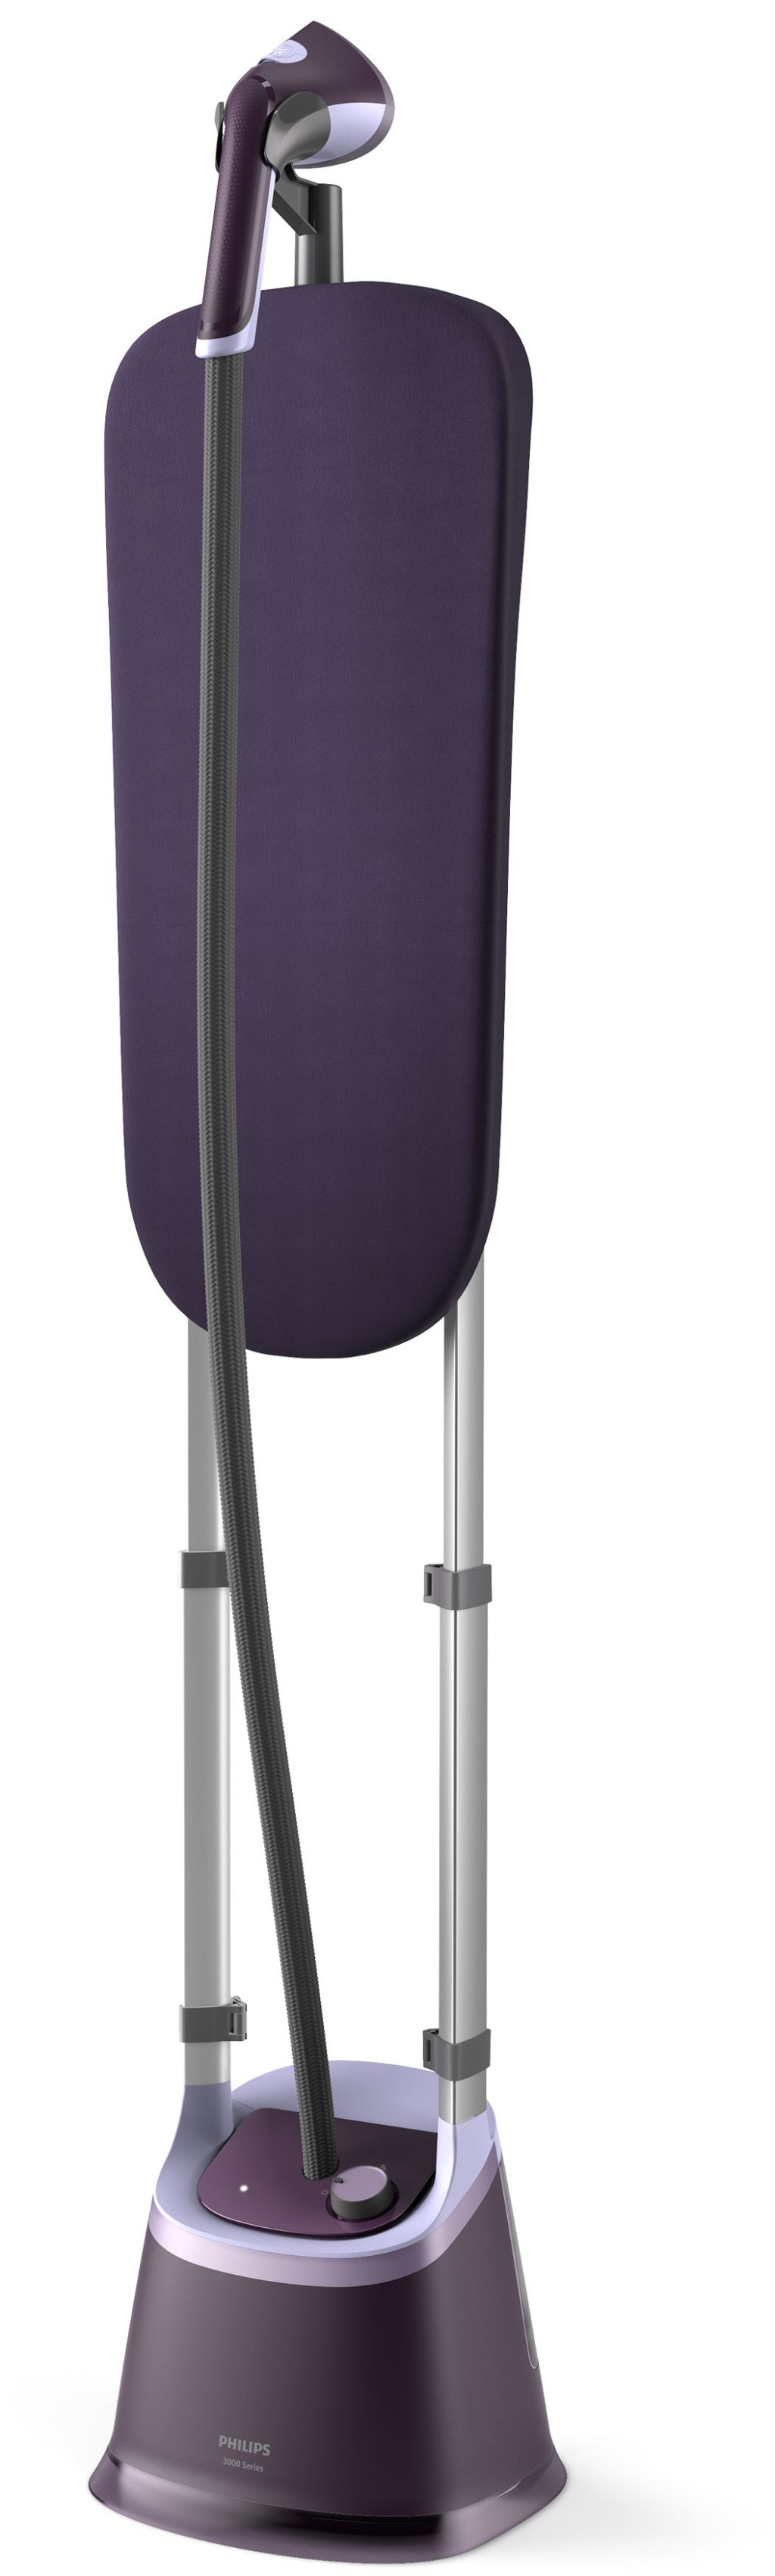 Philips STE3180/30 Stand Garment Steamer with XL StyleBoard, Purple | Philips